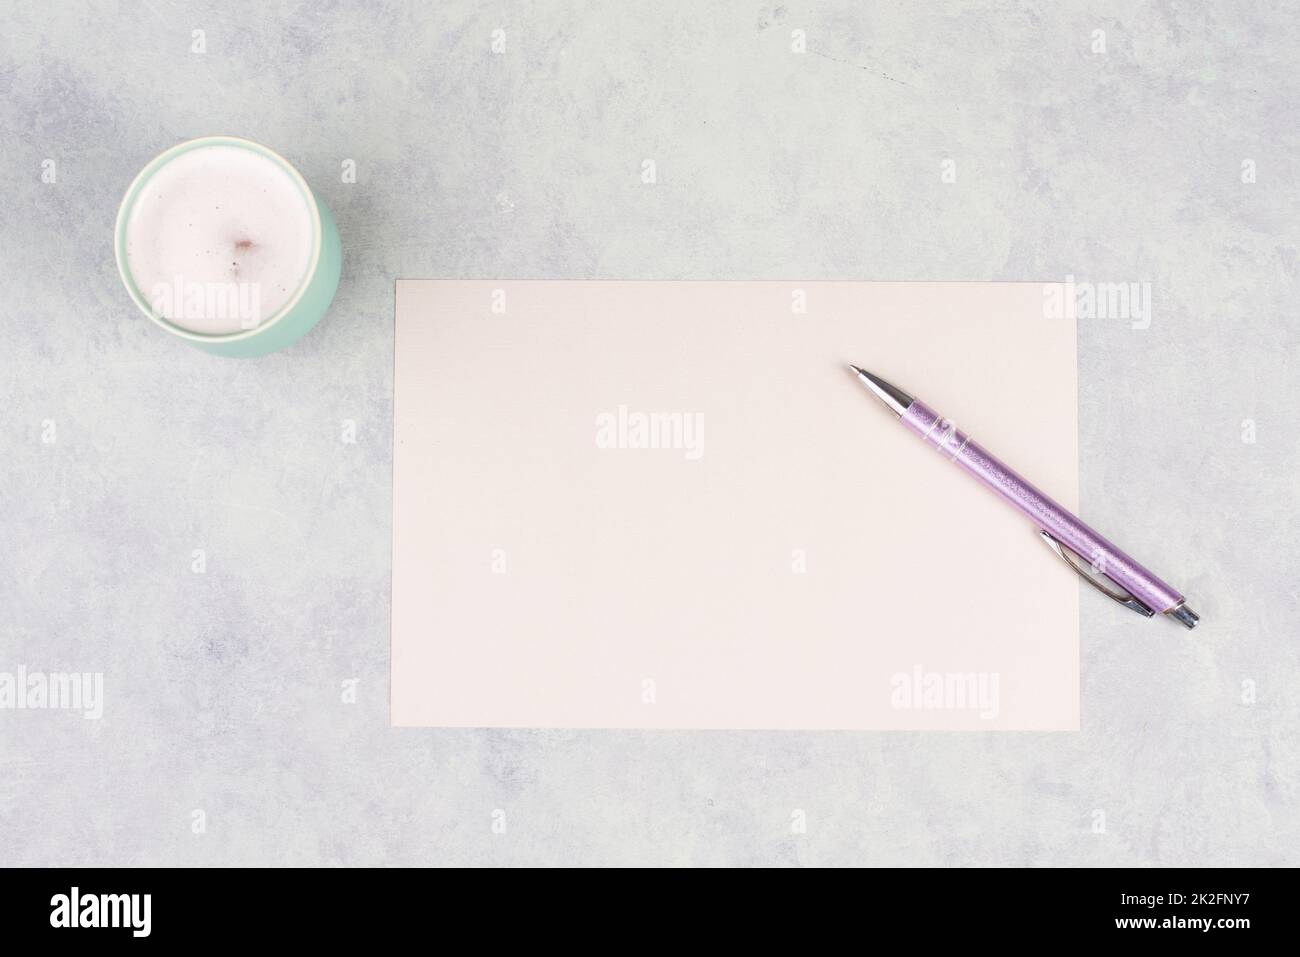 Empty paper with a pen and a cup of coffee, textured background, brainstorming for new ideas, writing a message, taking a break, home office desk Stock Photo